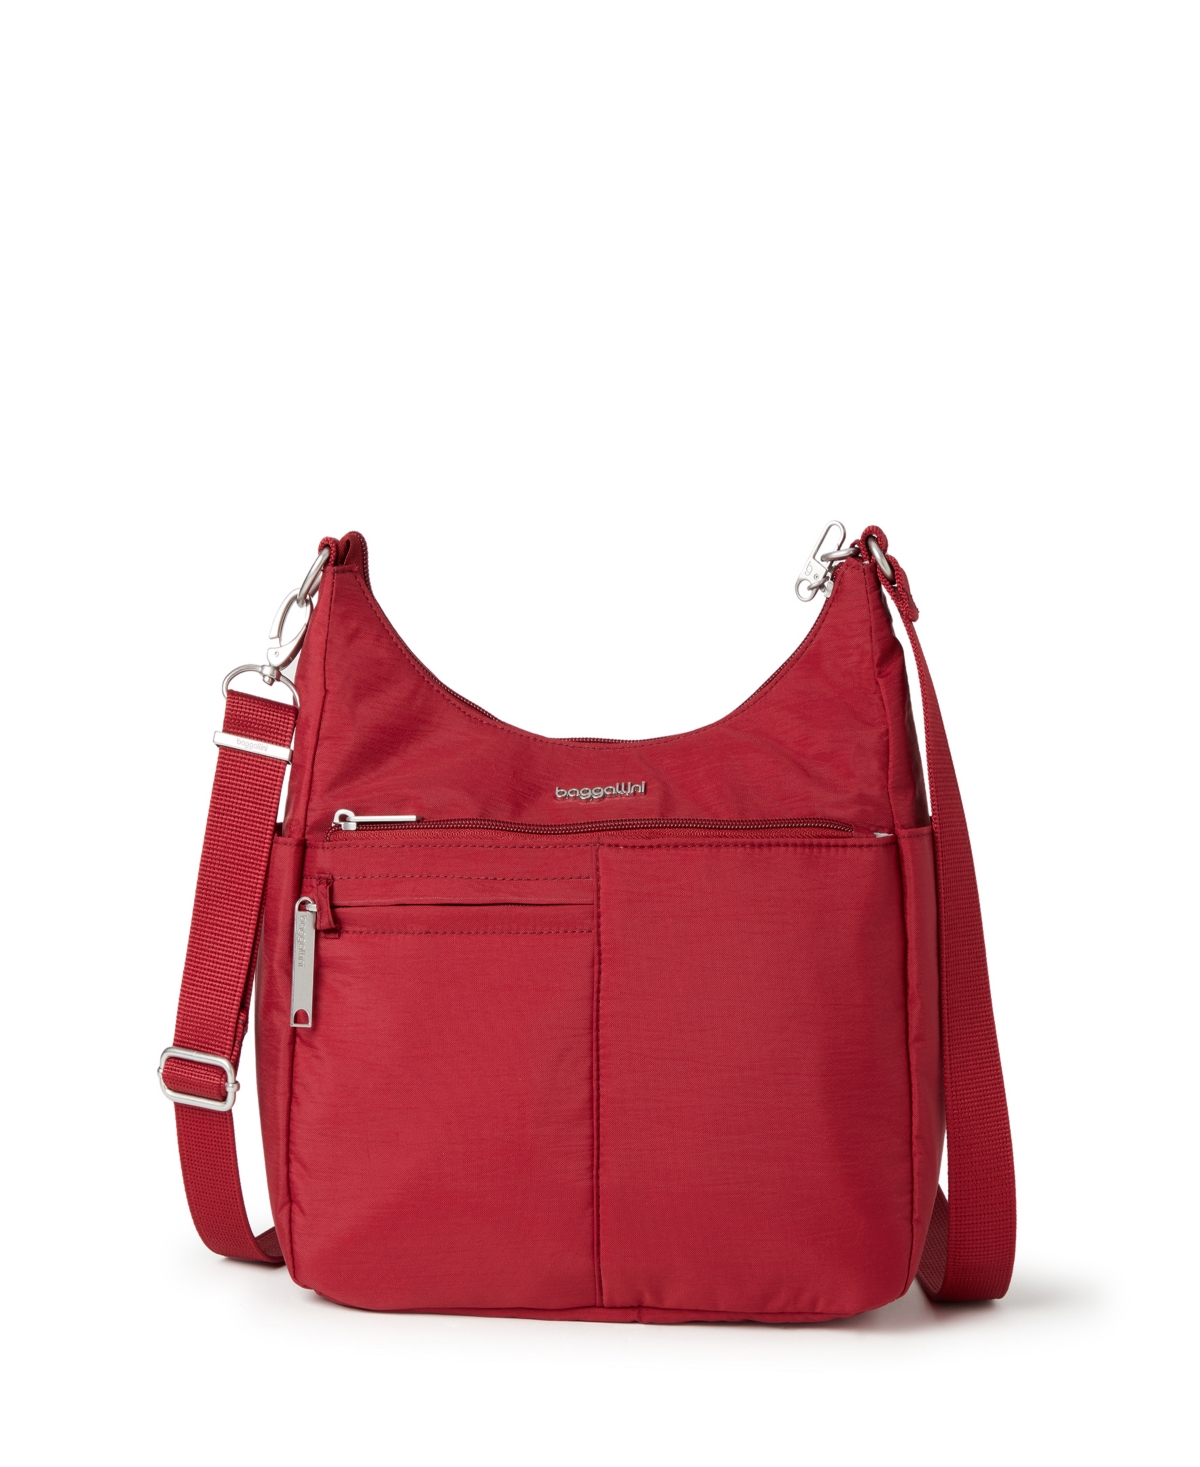 Baggallini Anti-theft Free Time Crossbody Bag In Red